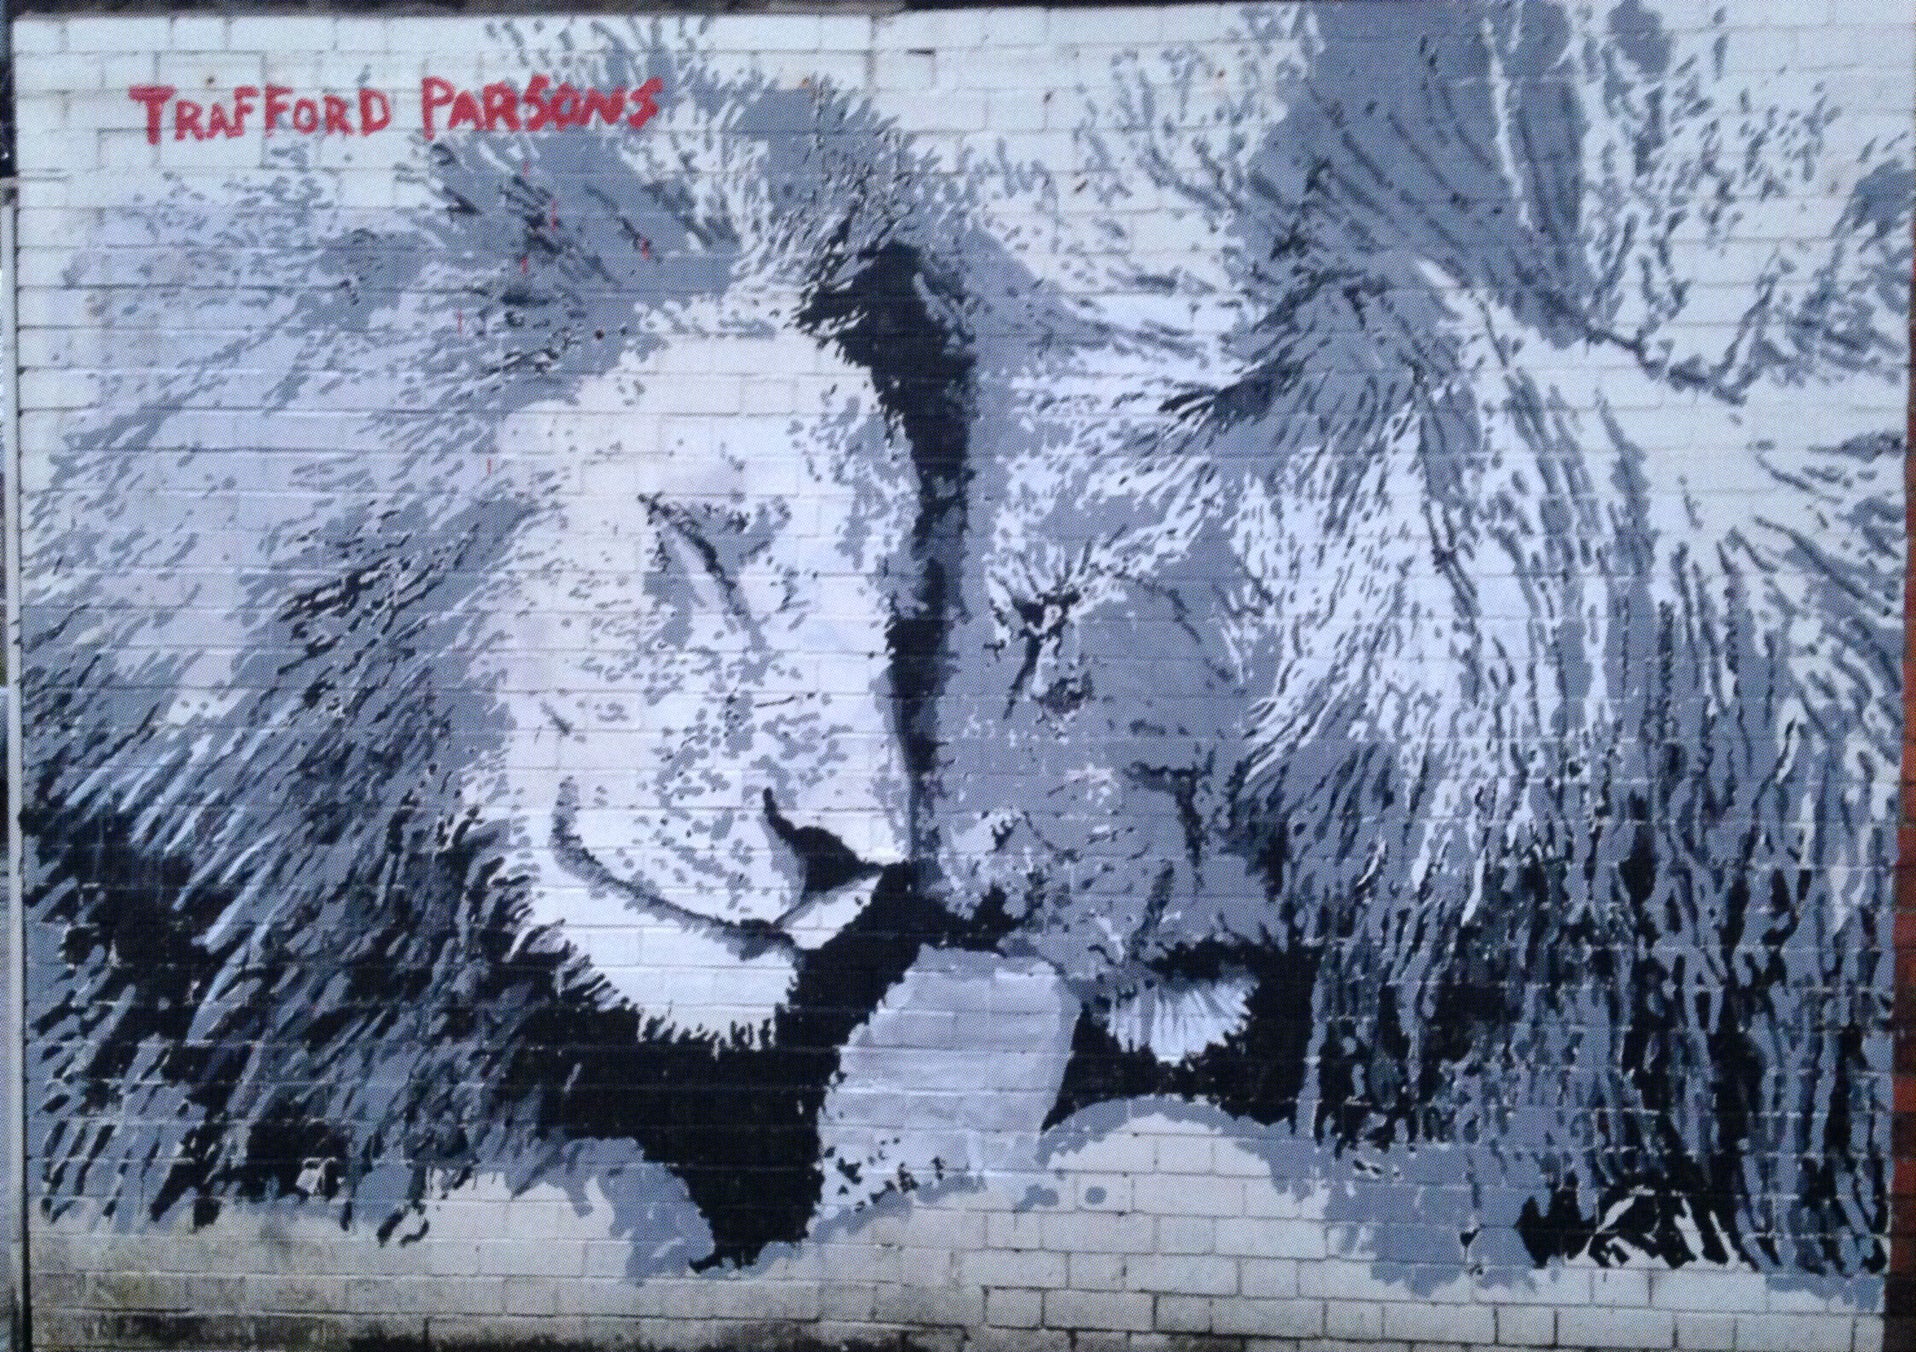 "Pride" Lions painted on Burton Rd, Manchester